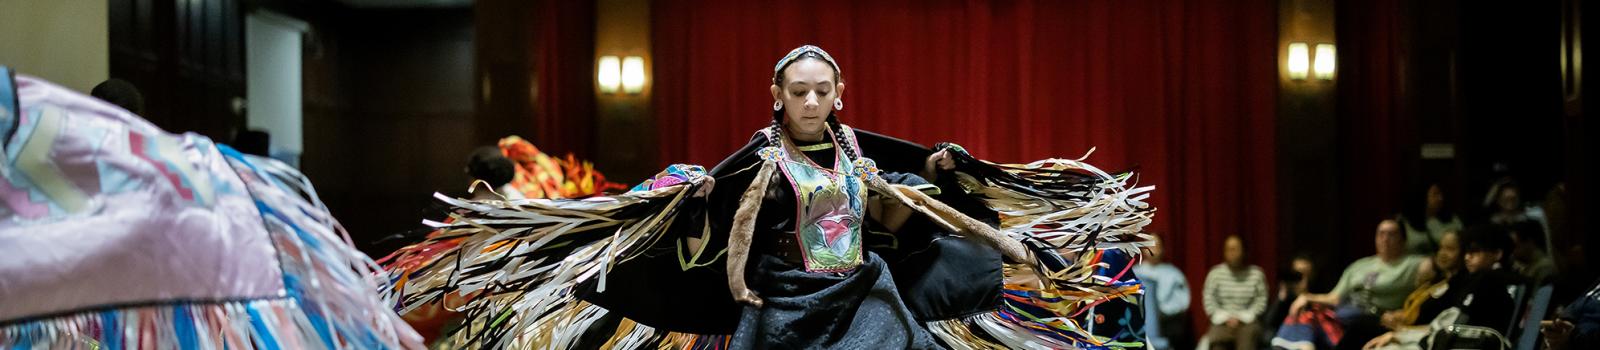 Young woman dances in the center of a powwow.